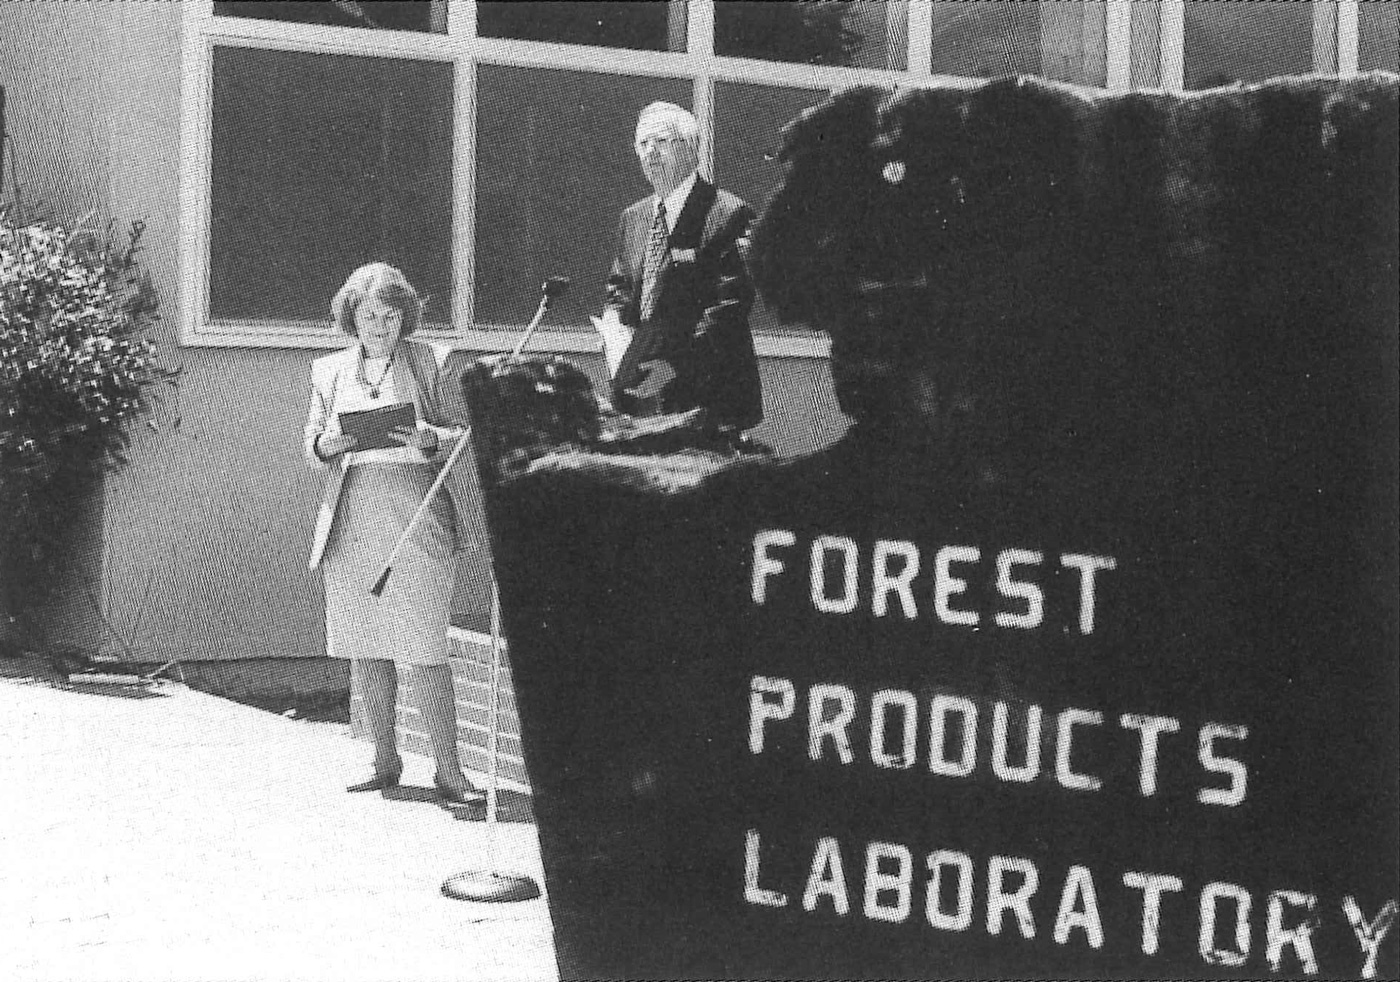 A black and white photo of a man standing at a lectern outdoors. A sign that reads "Forest Products Lab" is visible in the foreground.